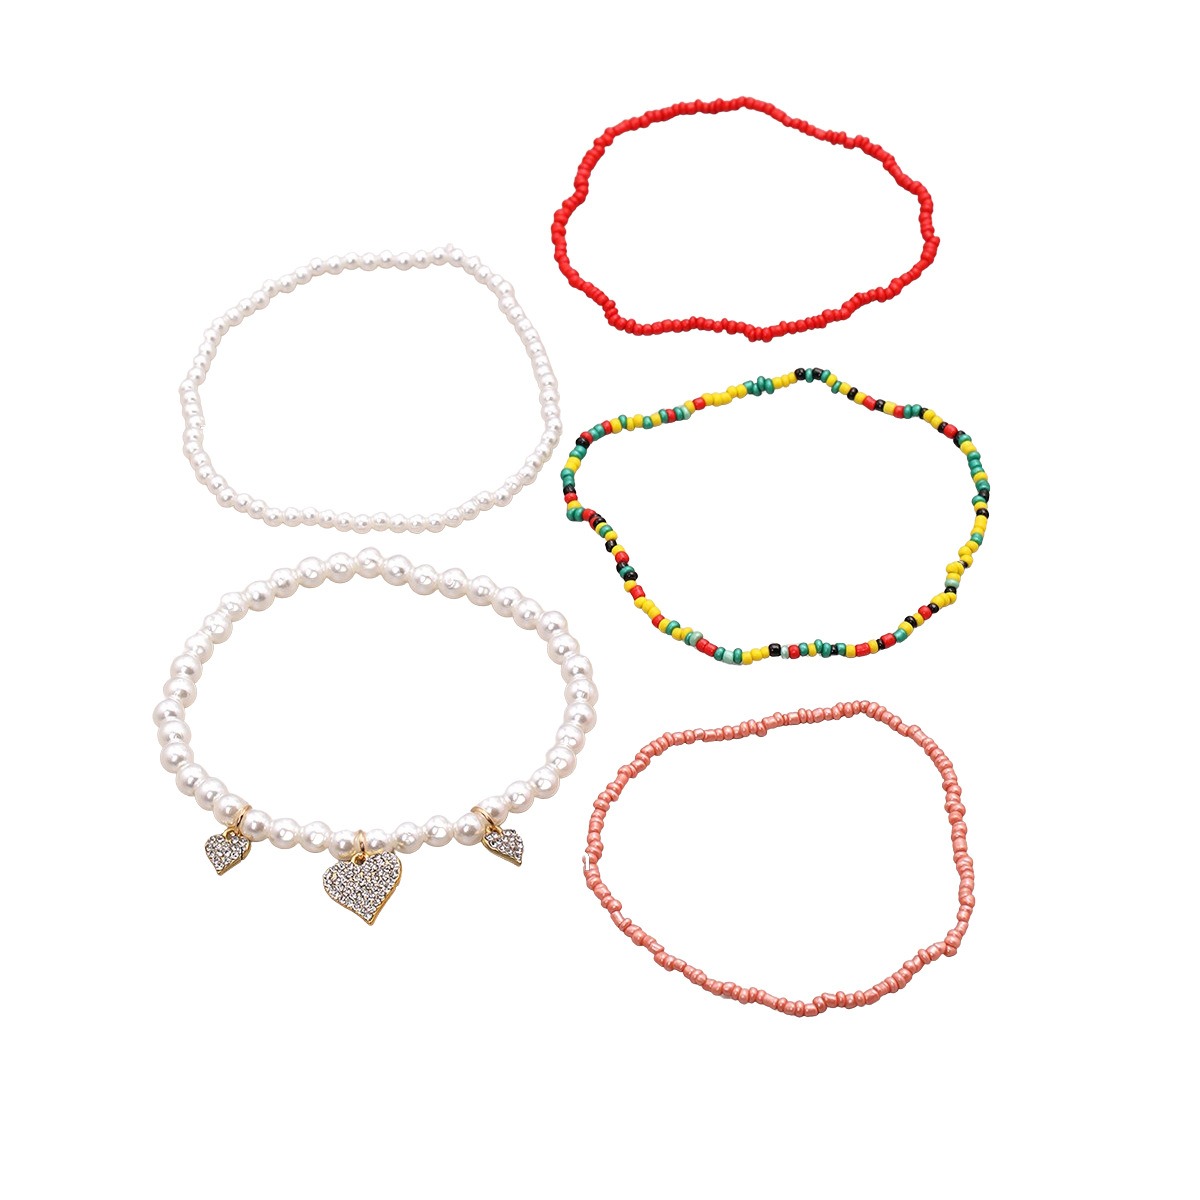 Hand woven beaded beach style anklet set